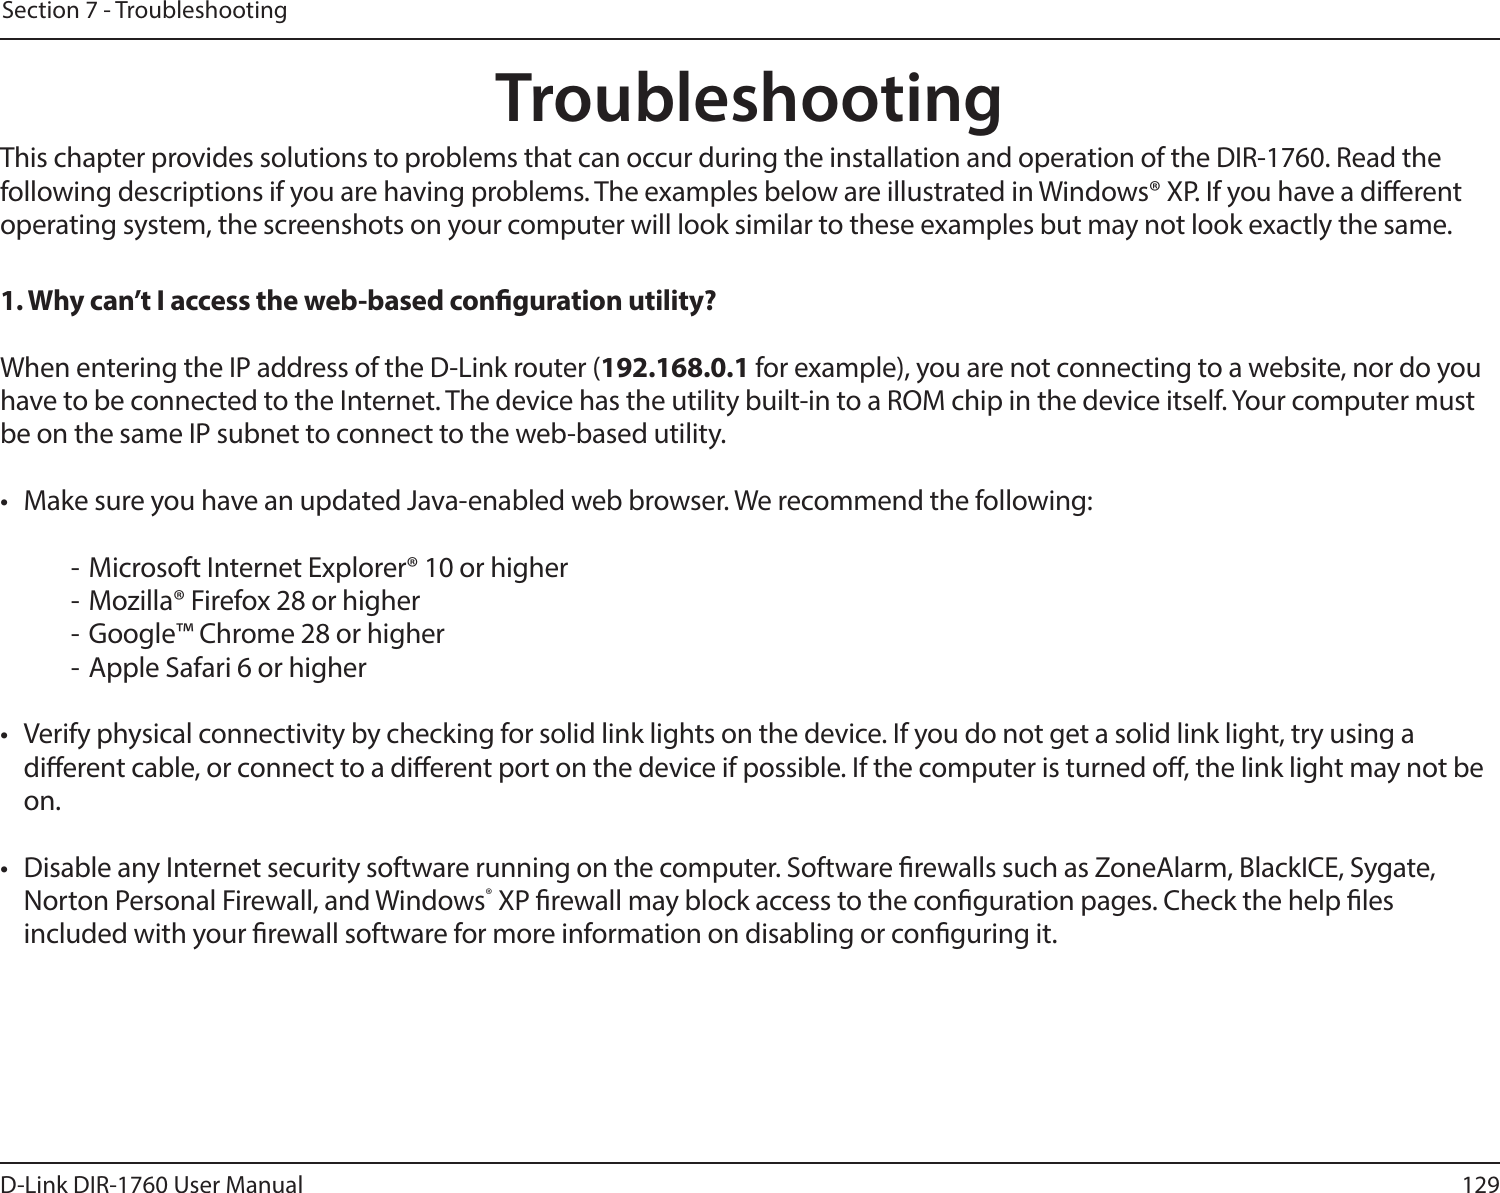 129D-Link DIR-1760 User ManualSection 7 - TroubleshootingTroubleshootingThis chapter provides solutions to problems that can occur during the installation and operation of the DIR-1760. Read the following descriptions if you are having problems. The examples below are illustrated in Windows® XP. If you have a dierent operating system, the screenshots on your computer will look similar to these examples but may not look exactly the same.1. Why can’t I access the web-based conguration utility?When entering the IP address of the D-Link router (192.168.0.1 for example), you are not connecting to a website, nor do you have to be connected to the Internet. The device has the utility built-in to a ROM chip in the device itself. Your computer must be on the same IP subnet to connect to the web-based utility. •  Make sure you have an updated Java-enabled web browser. We recommend the following:  - Microsoft Internet Explorer® 10 or higher- Mozilla® Firefox 28 or higher- Google™ Chrome 28 or higher- Apple Safari 6 or higher•  Verify physical connectivity by checking for solid link lights on the device. If you do not get a solid link light, try using a dierent cable, or connect to a dierent port on the device if possible. If the computer is turned o, the link light may not be on.•  Disable any Internet security software running on the computer. Software rewalls such as ZoneAlarm, BlackICE, Sygate, Norton Personal Firewall, and Windows® XP rewall may block access to the conguration pages. Check the help les included with your rewall software for more information on disabling or conguring it.